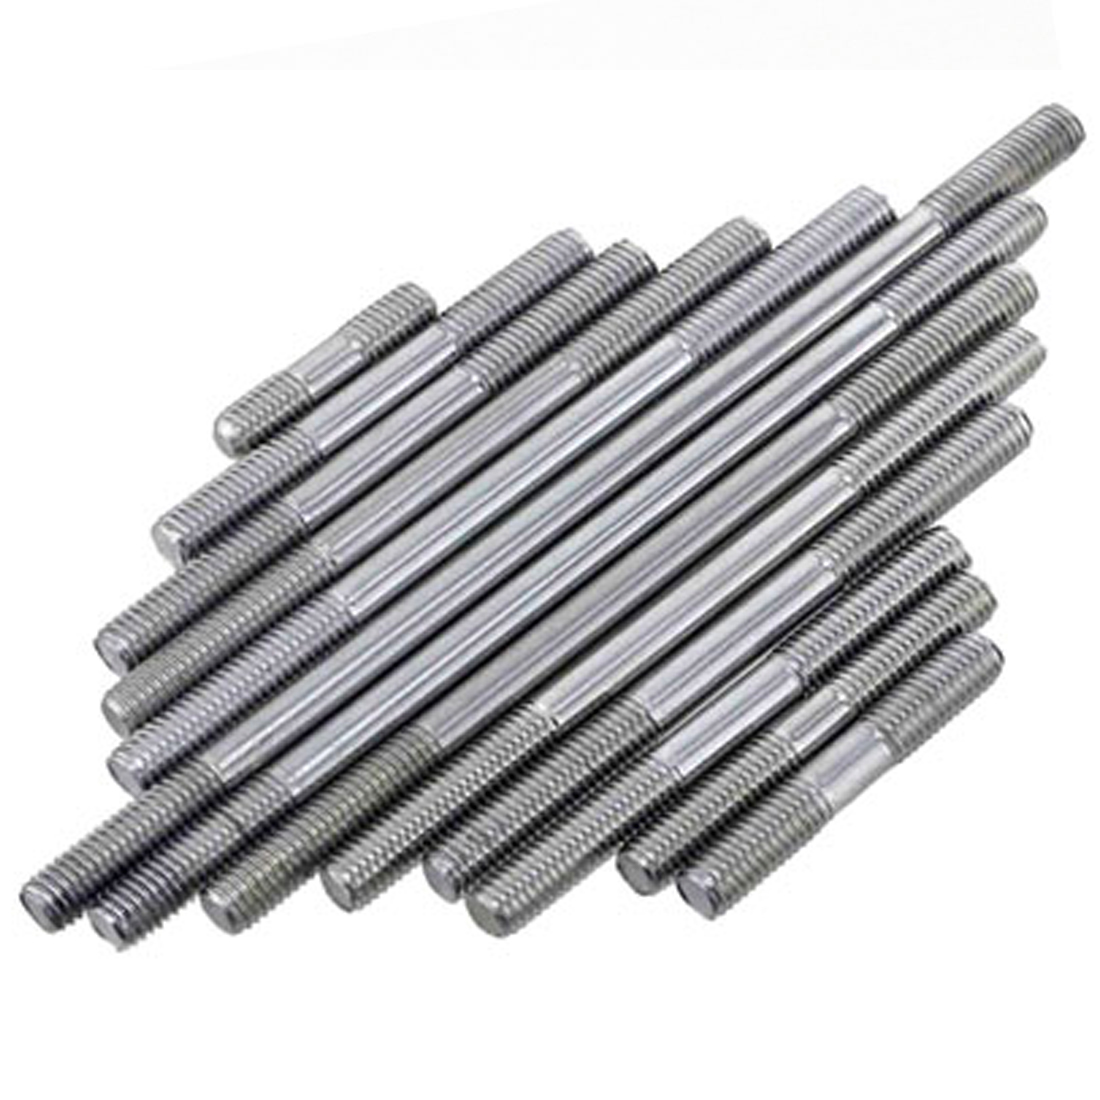 all-threaded-rods-